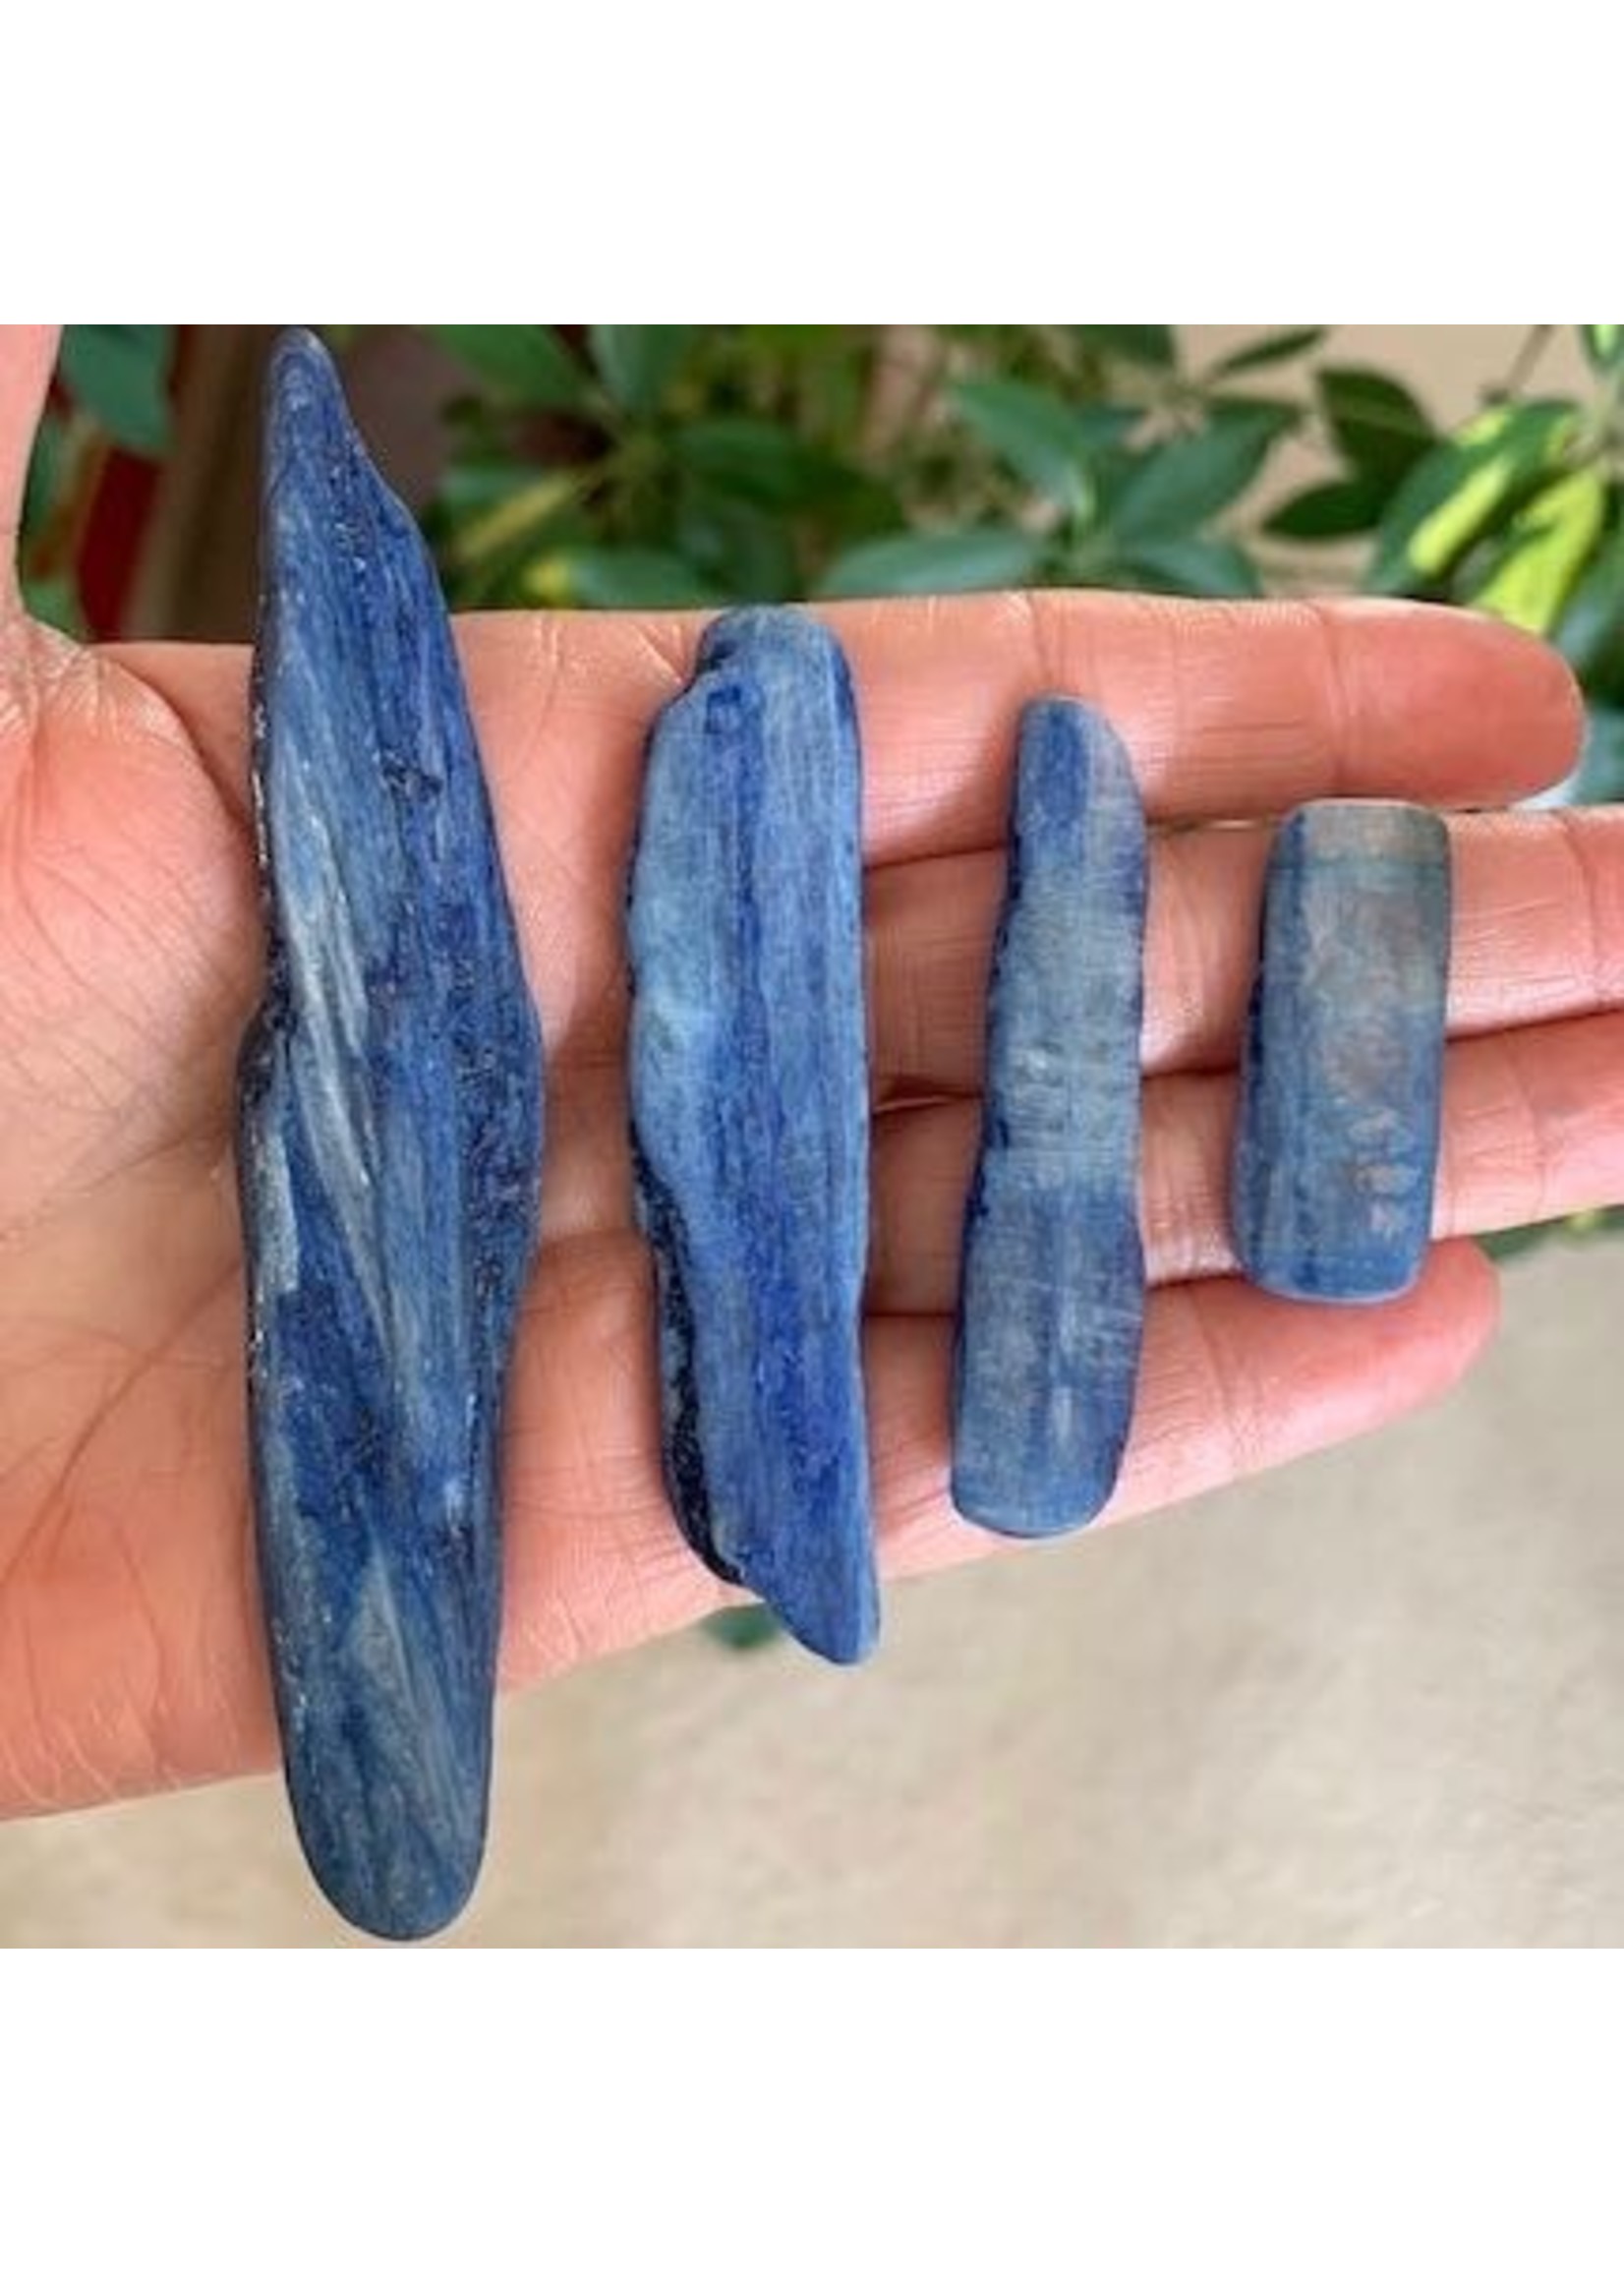 Indigo Kyanite Tumbled for speaking your truth